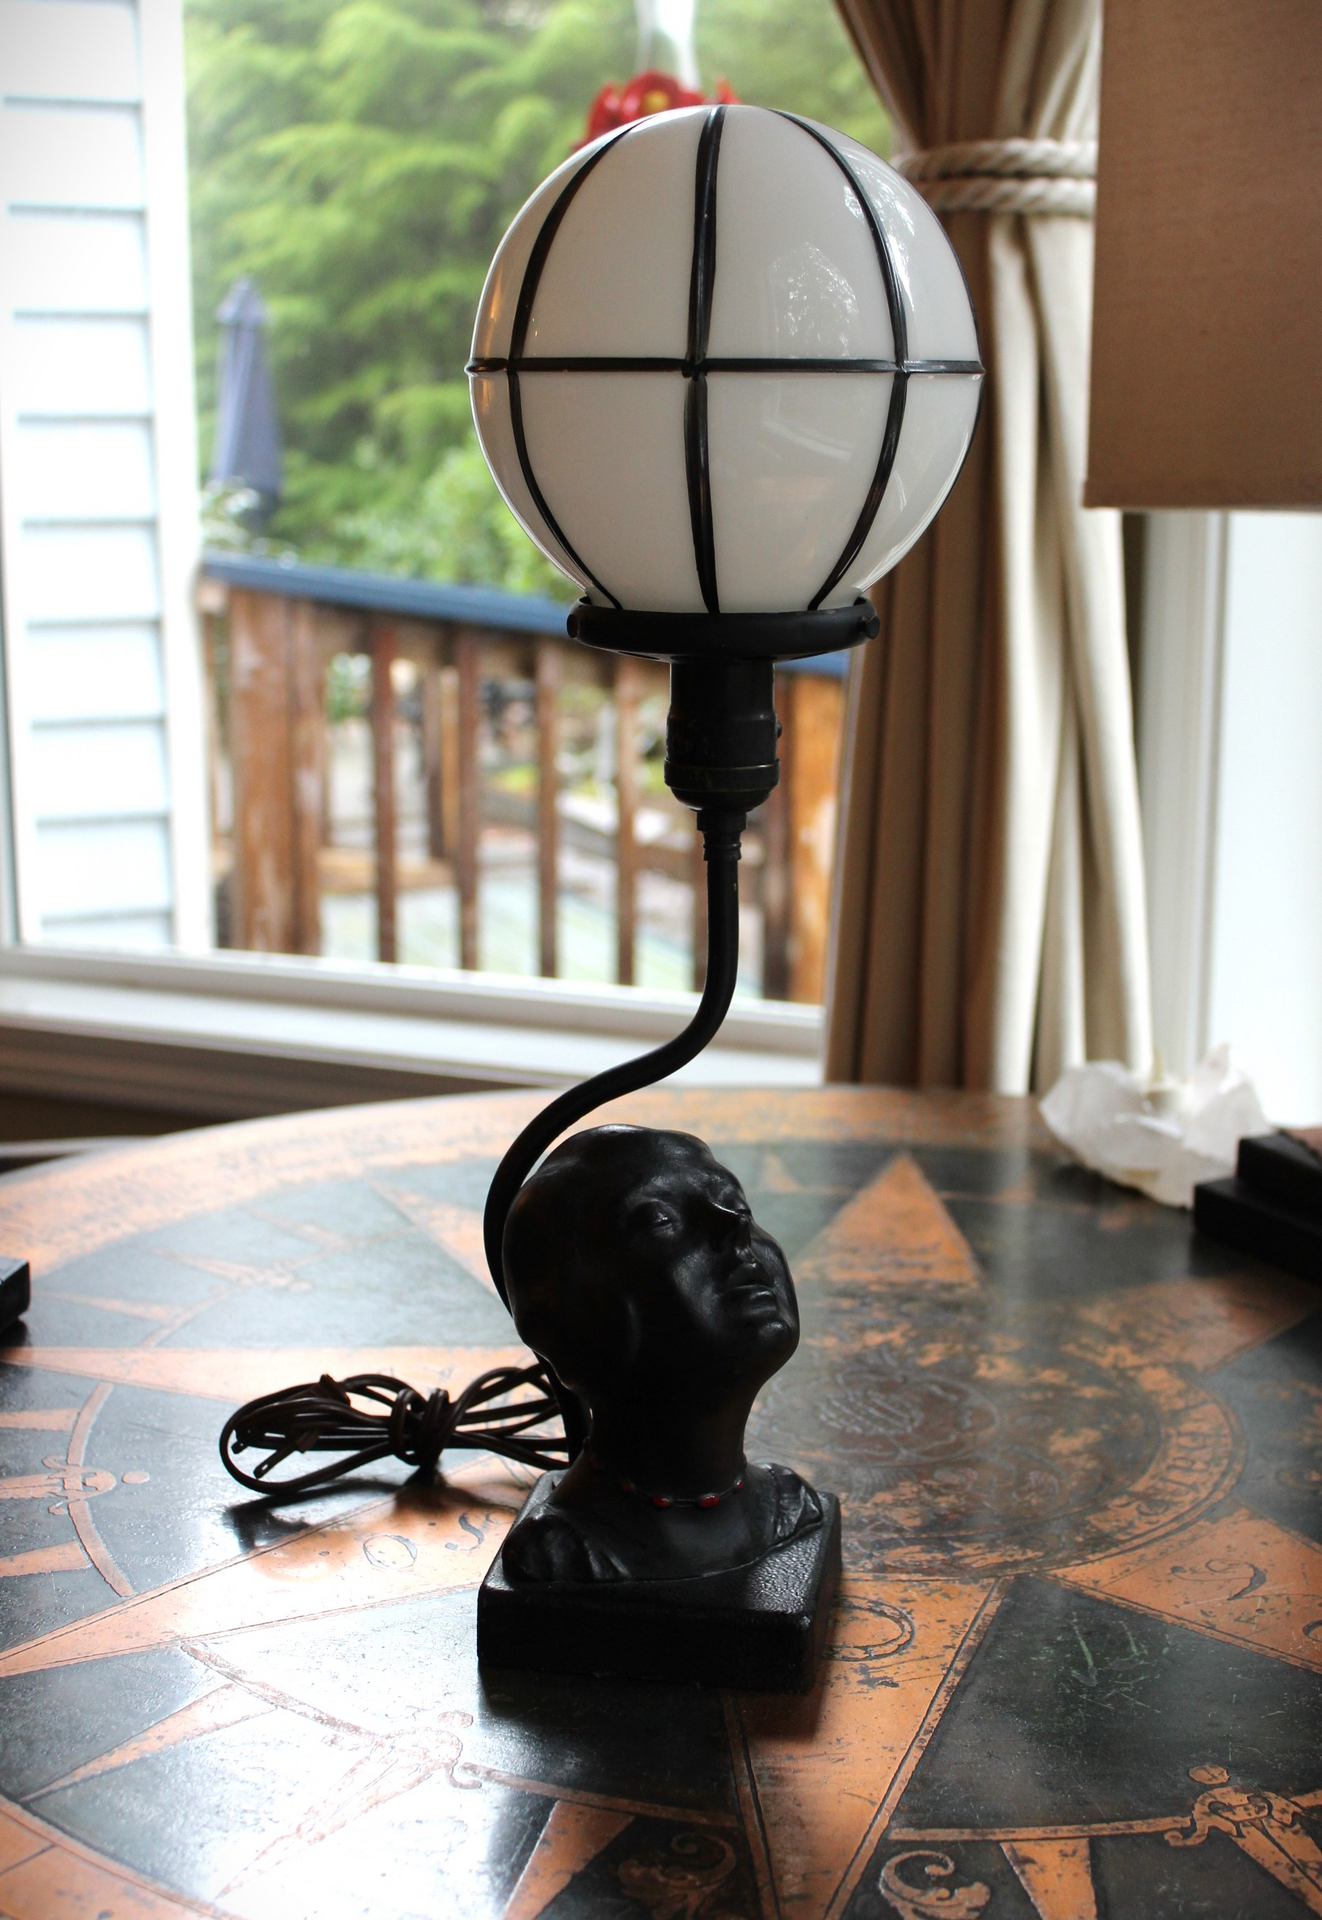 Antique Sculptural Moon Globe Lamp with Amazing Bronze Sculptural Face and Leaded Glass Moon Orb